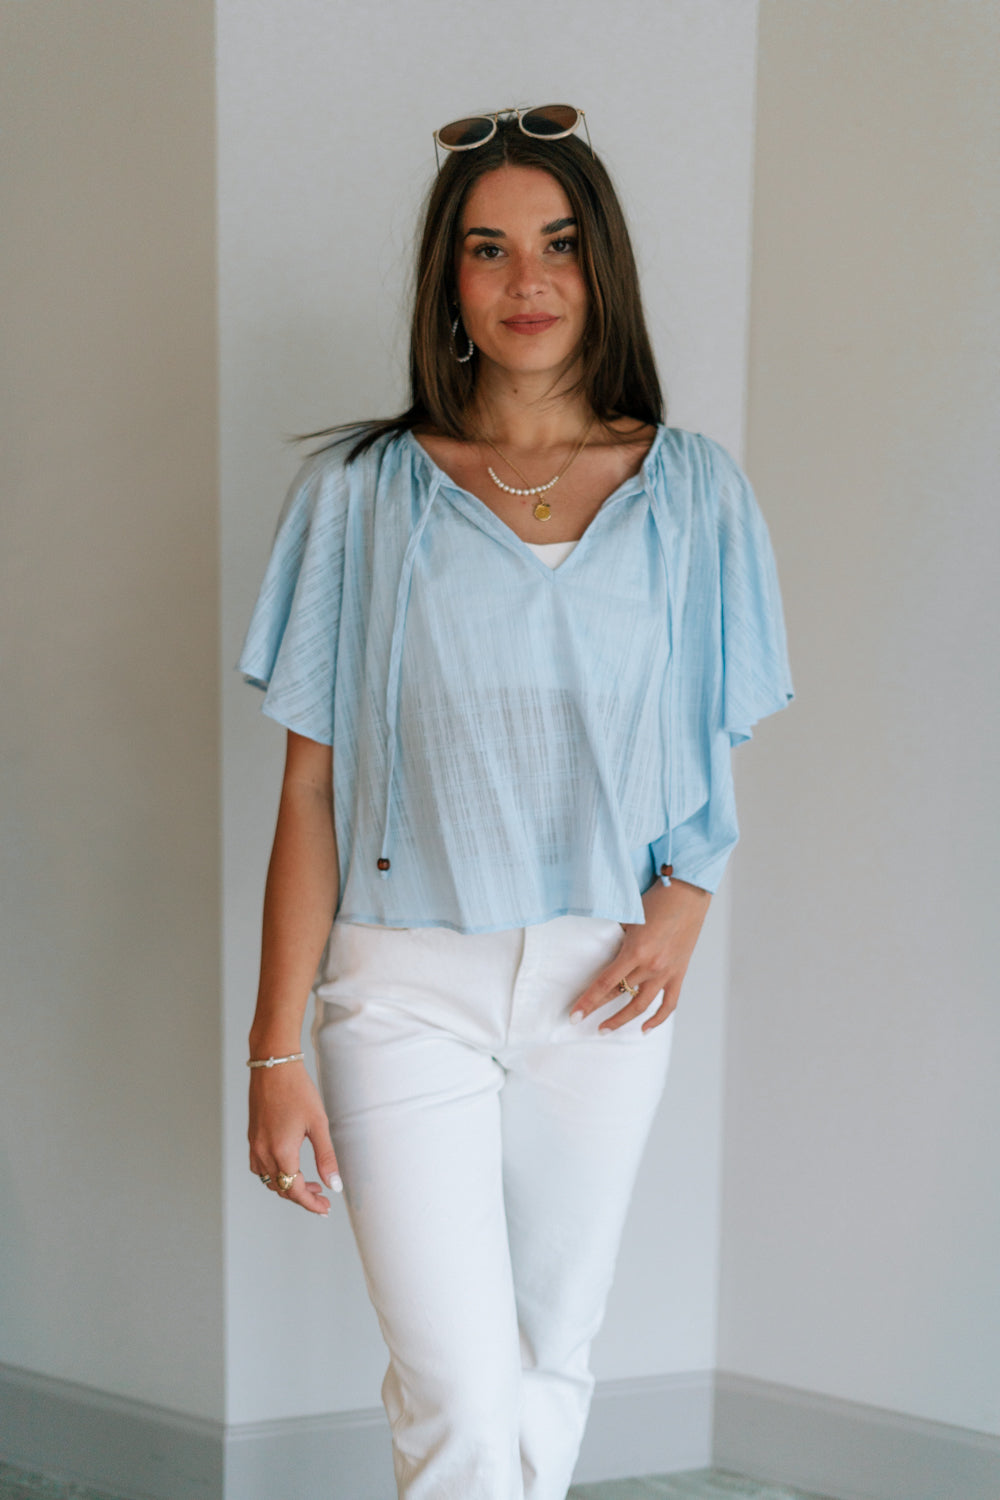 Front view of female model wearing the Danna Light Blue Short Sleeve Top which features Light Blue Cotton Fabric, Round Neckline with Tie Closure, Wooden Beads Detail and Short Sleeves